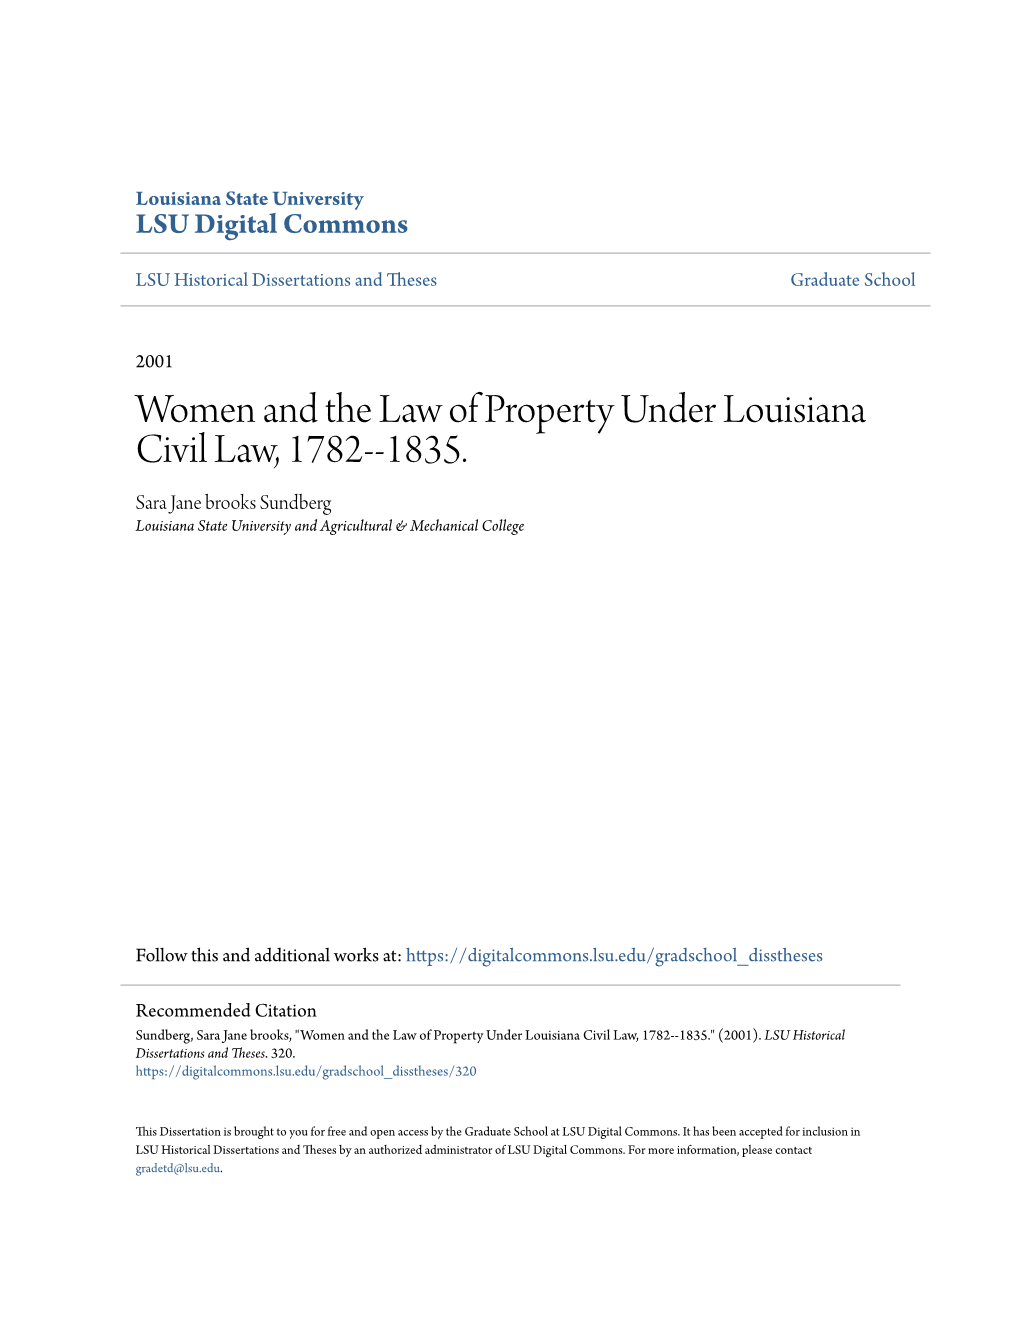 Women and the Law of Property Under Louisiana Civil Law, 1782--1835